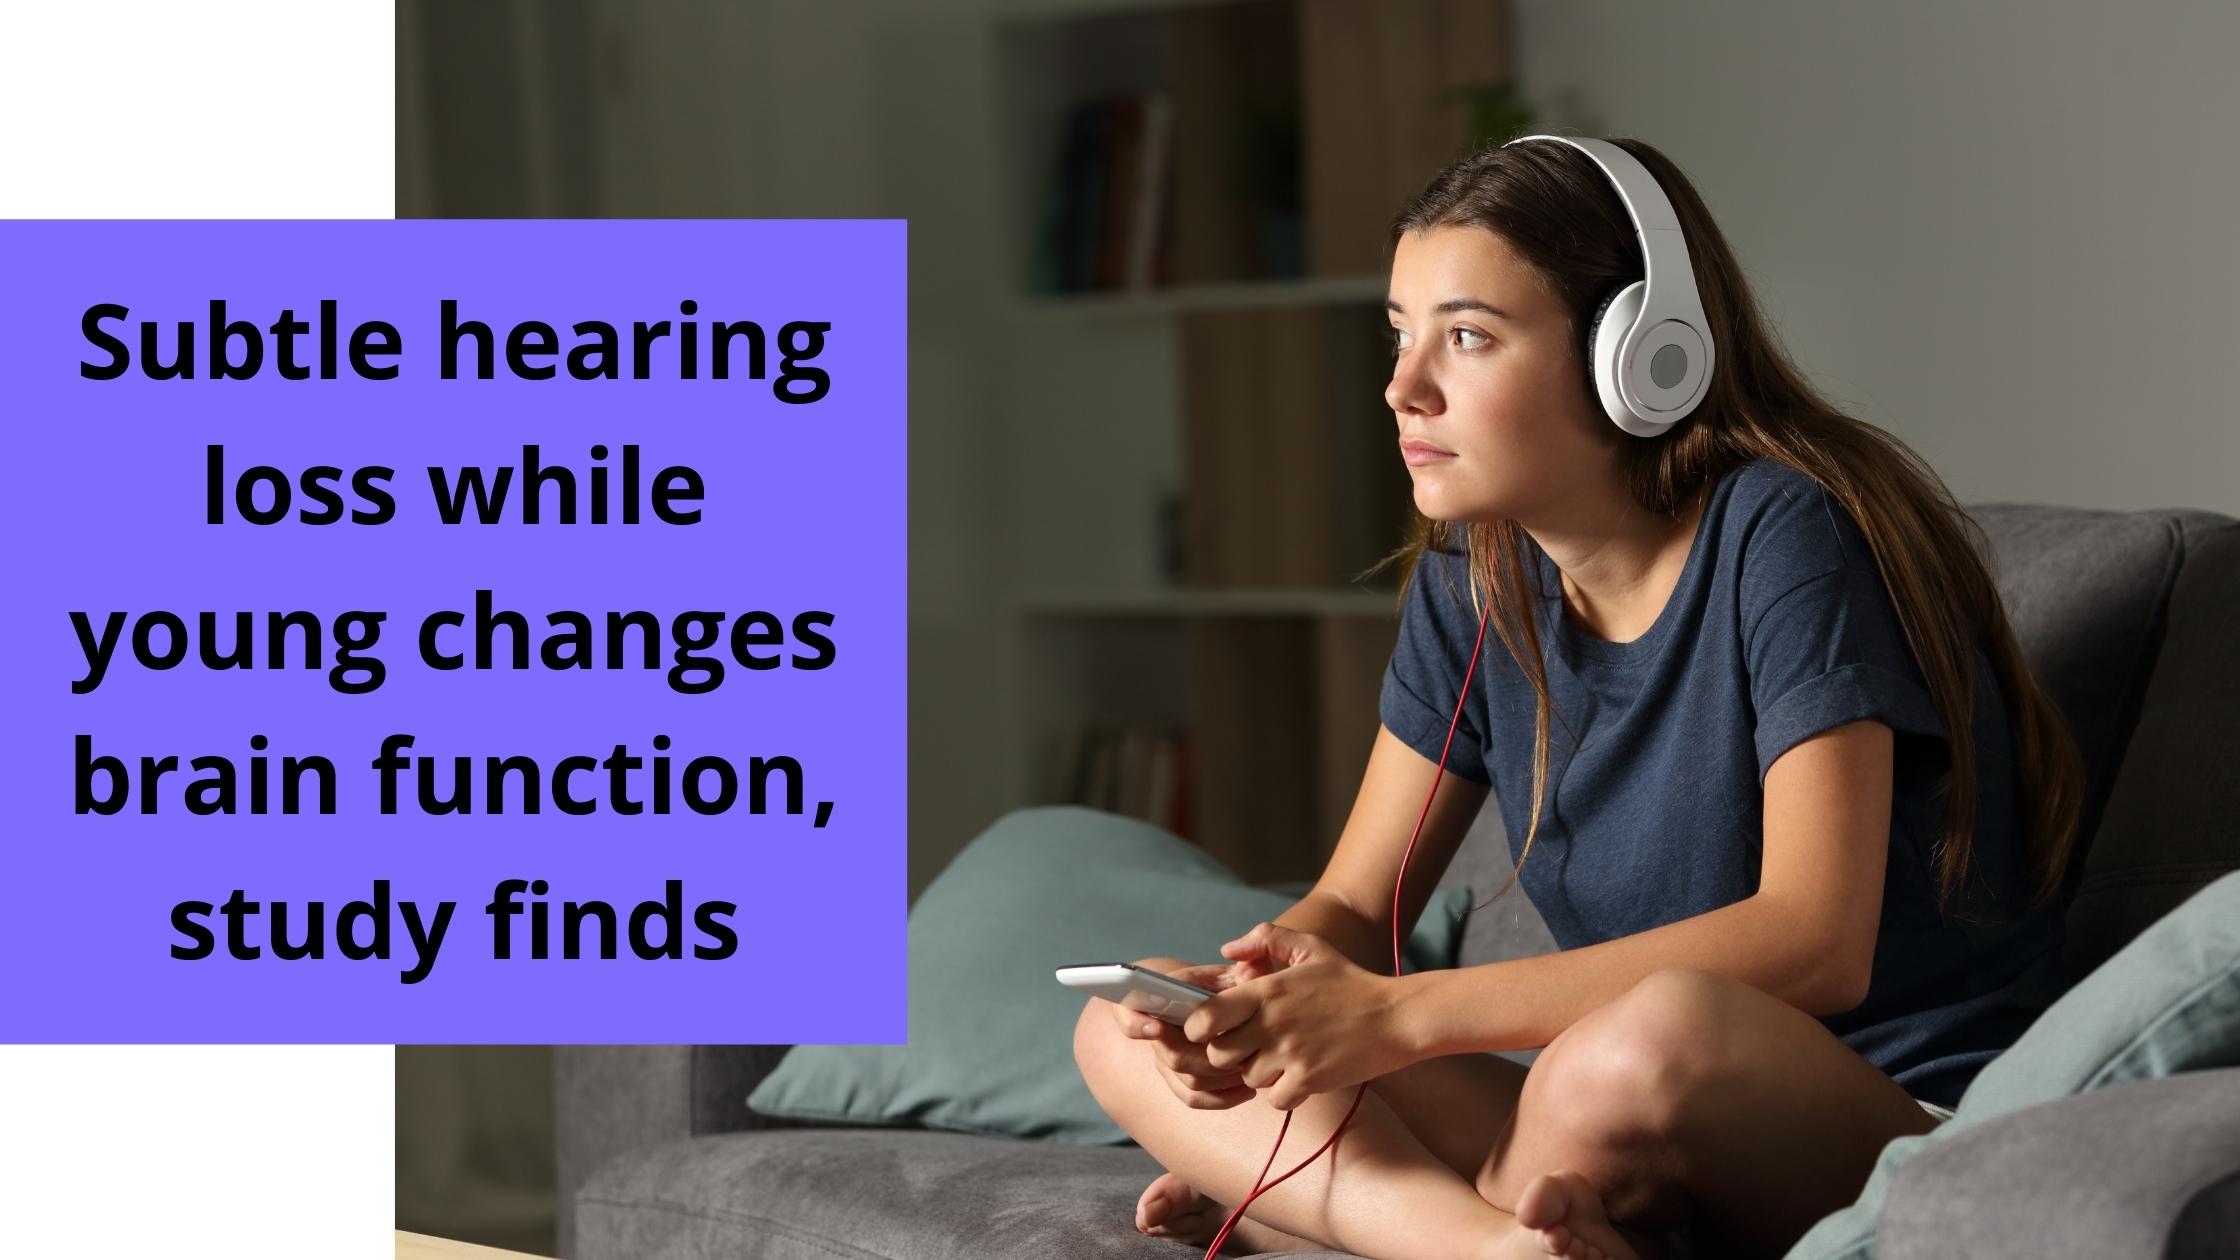 Featured image for “Subtle hearing loss while young changes brain function, study finds”